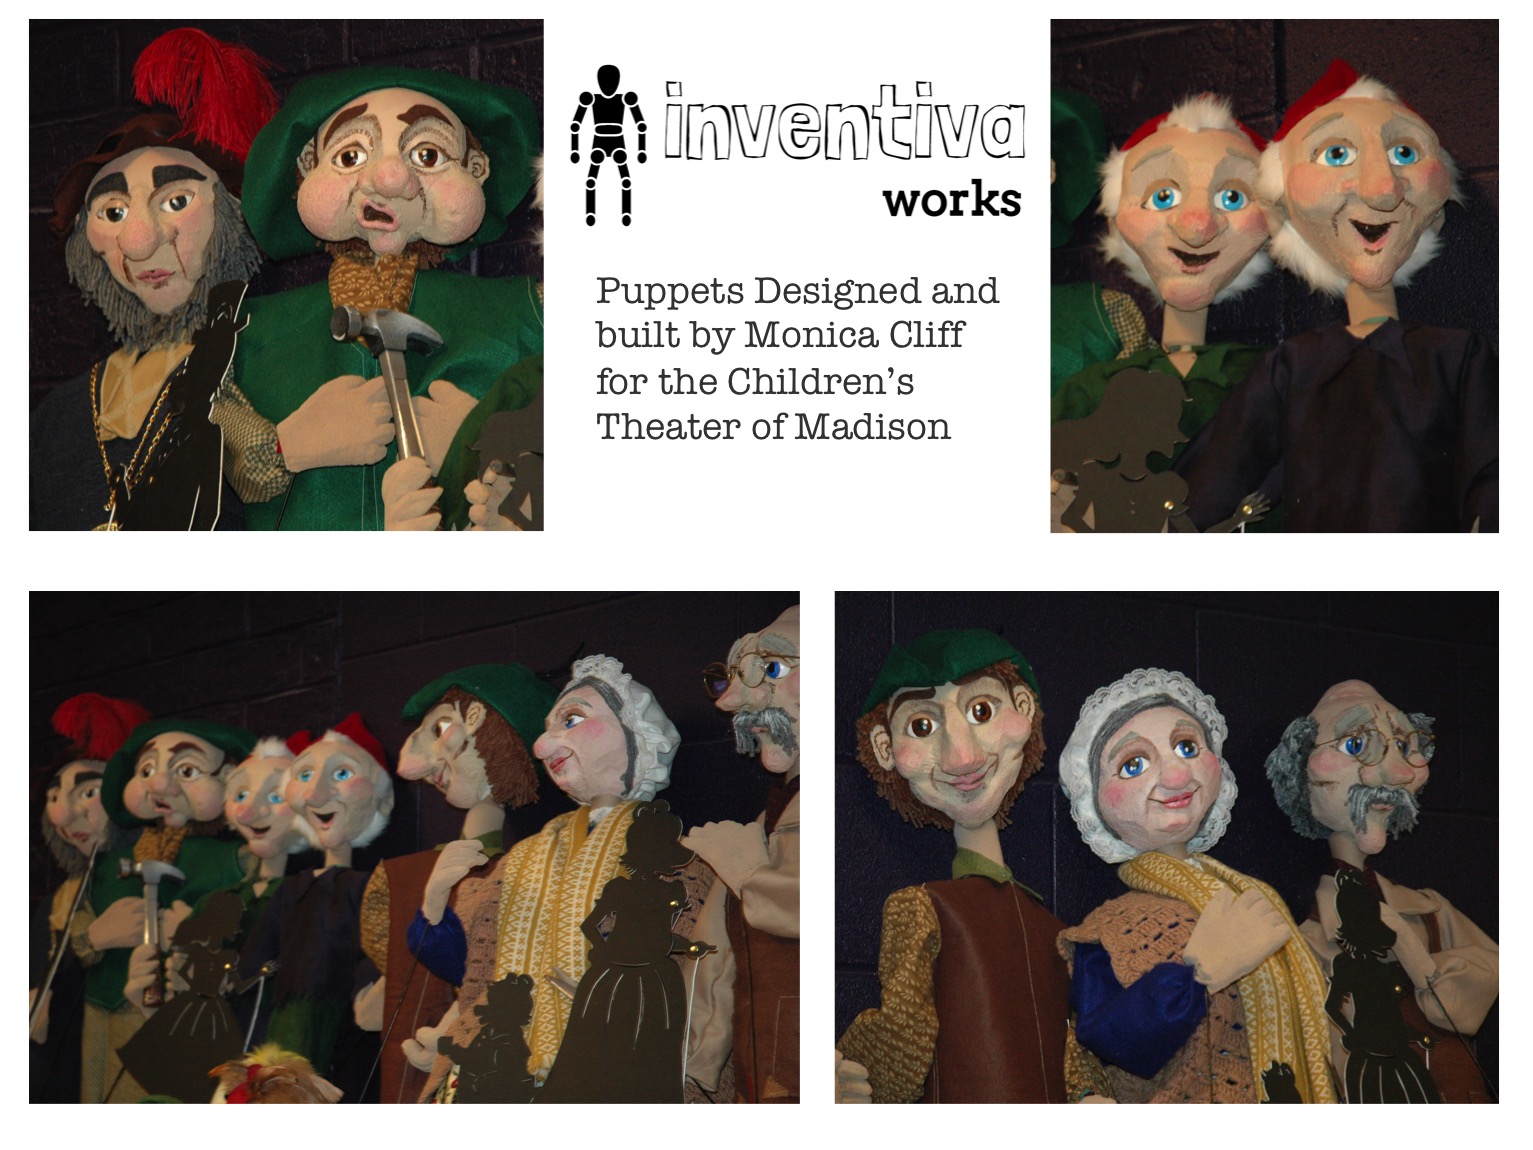 The Elves and the Shoemaker puppets